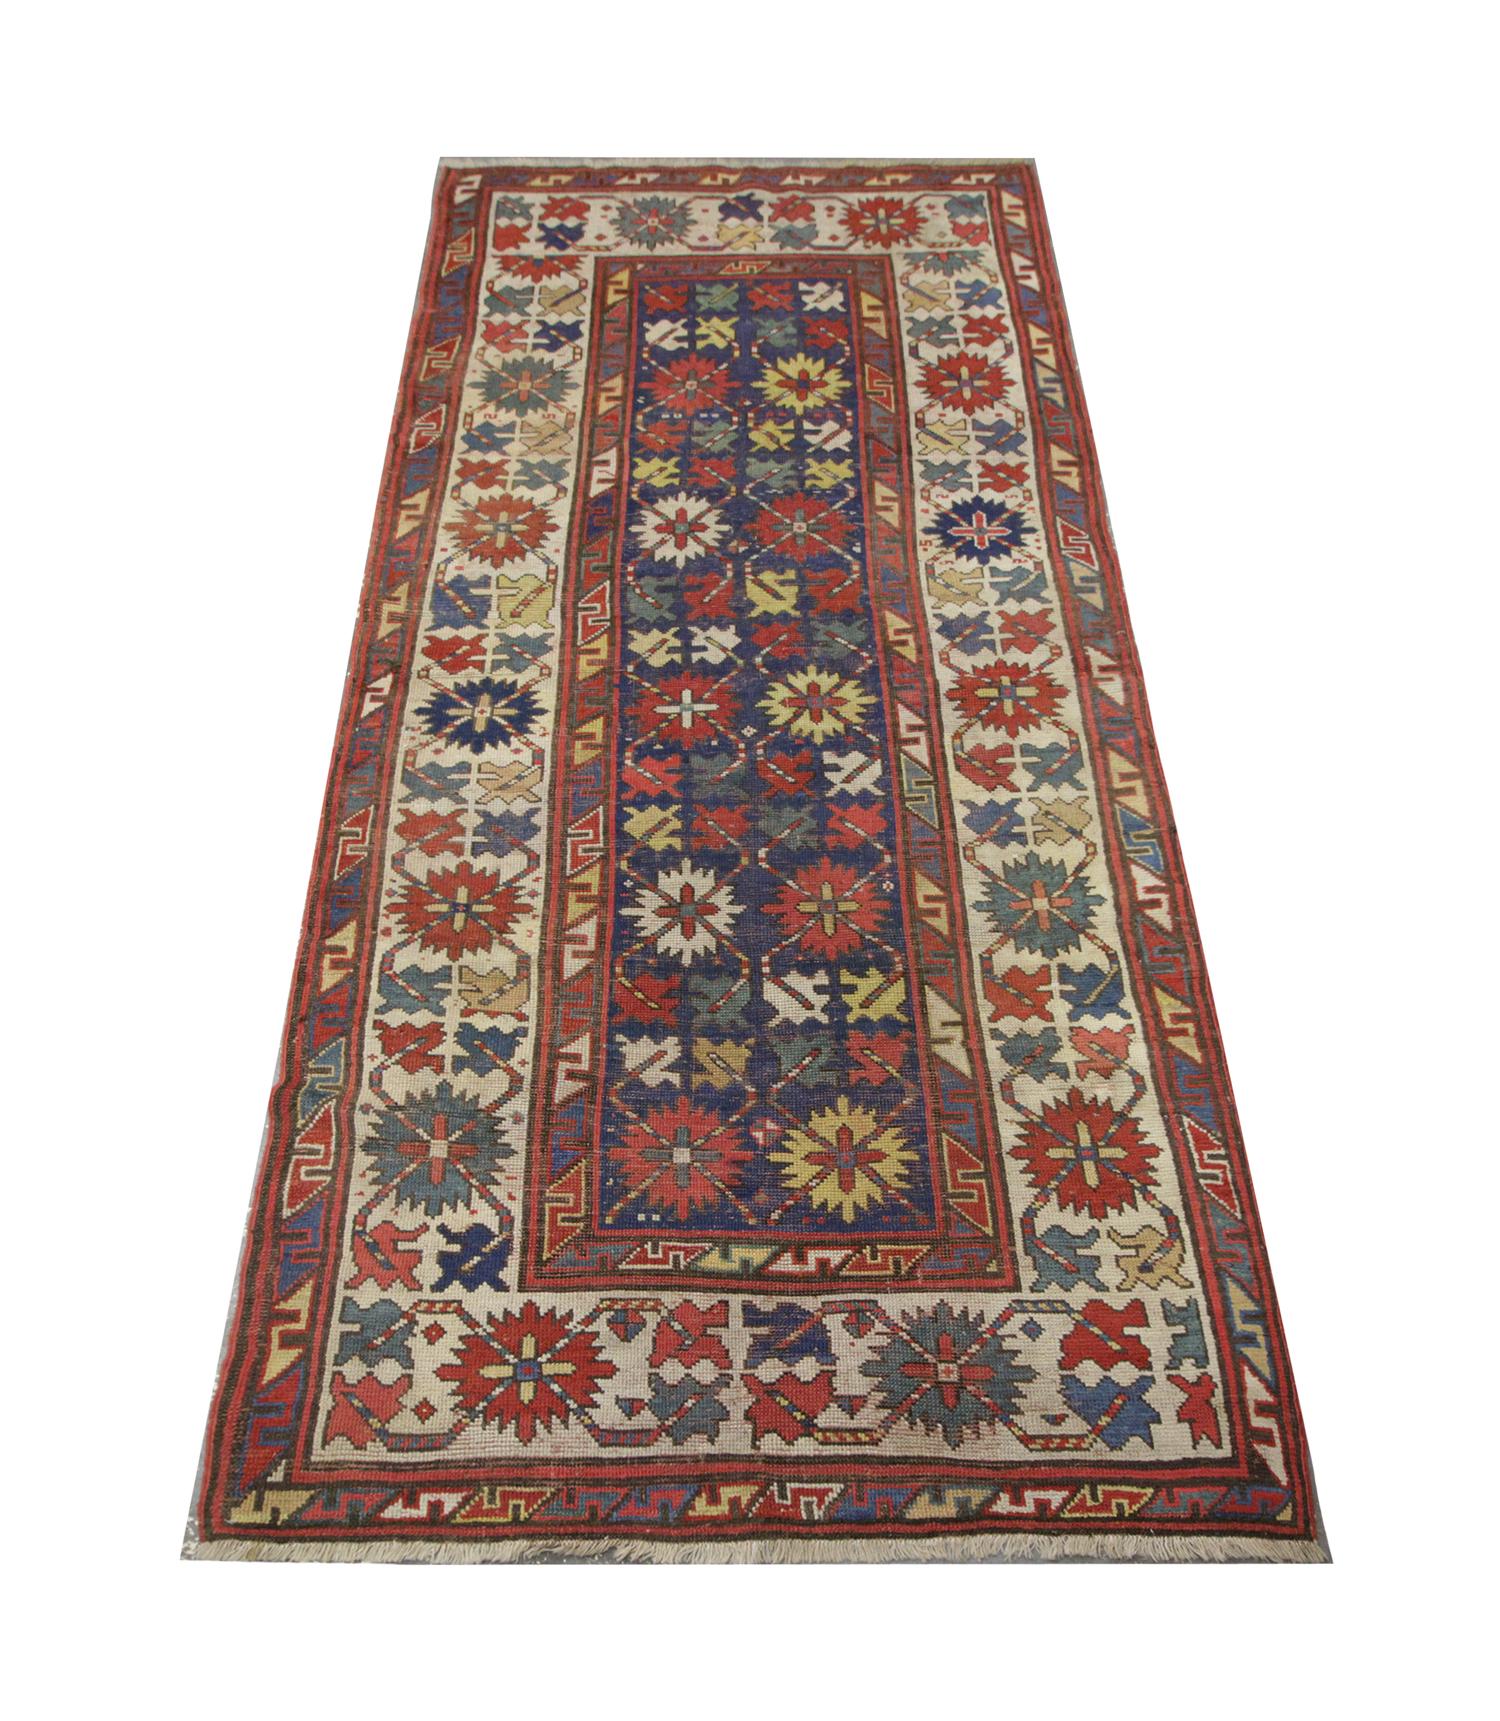 Vibrant primary colors have been woven into a highly-detailed tribal design. Featuring a repeat pattern central design woven on deep blue background, this is enclosed by a highly detailed border.
This high-quality antique Kazak rug is perfect for